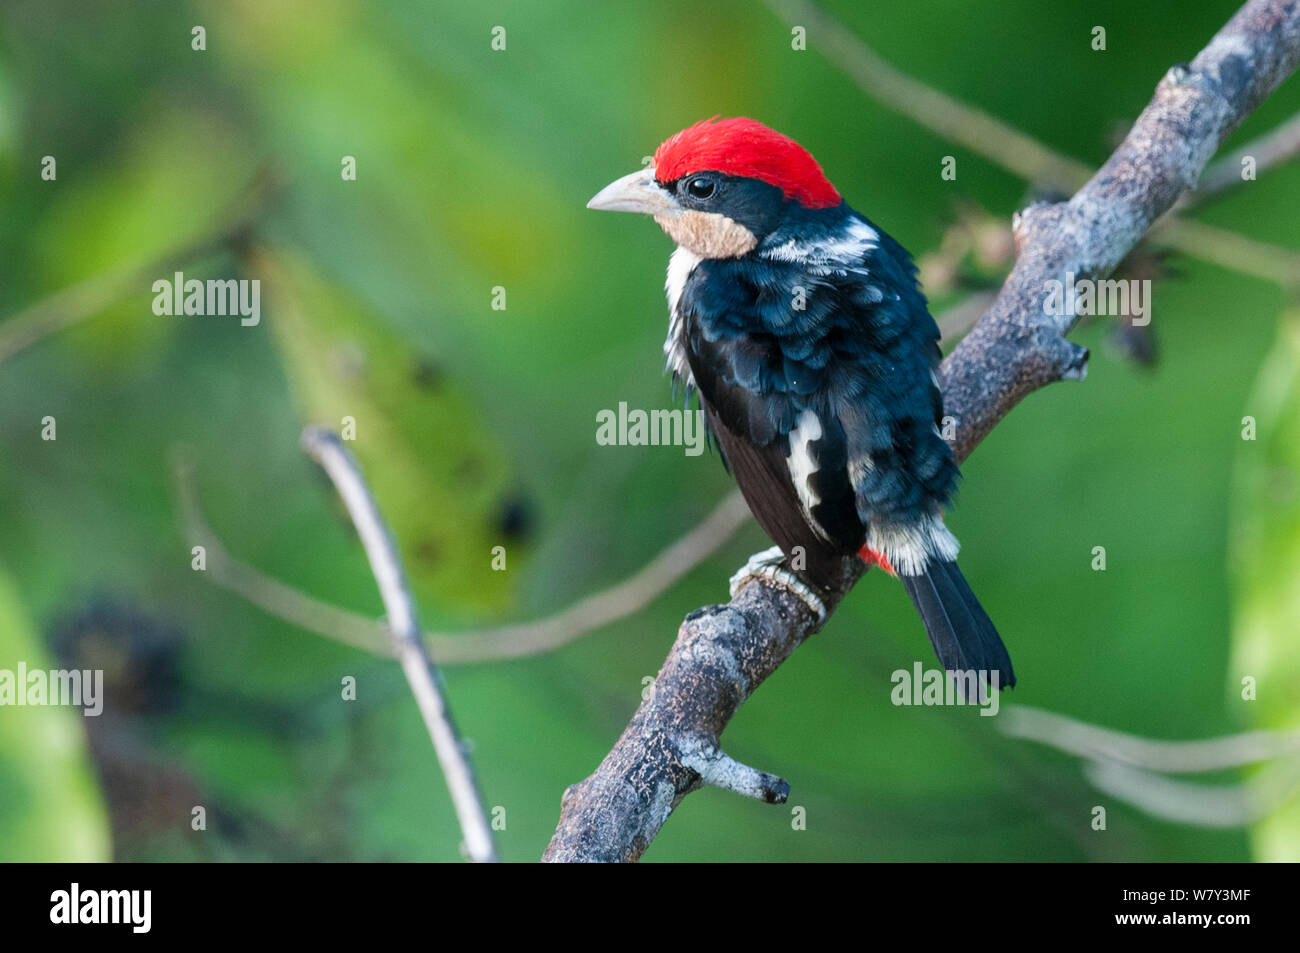 Male Black-girdled Barbet (Capito dayi) perched in rainforest canopy. Cristalino State Park, Amazonia, Brazil, South America. Stock Photo